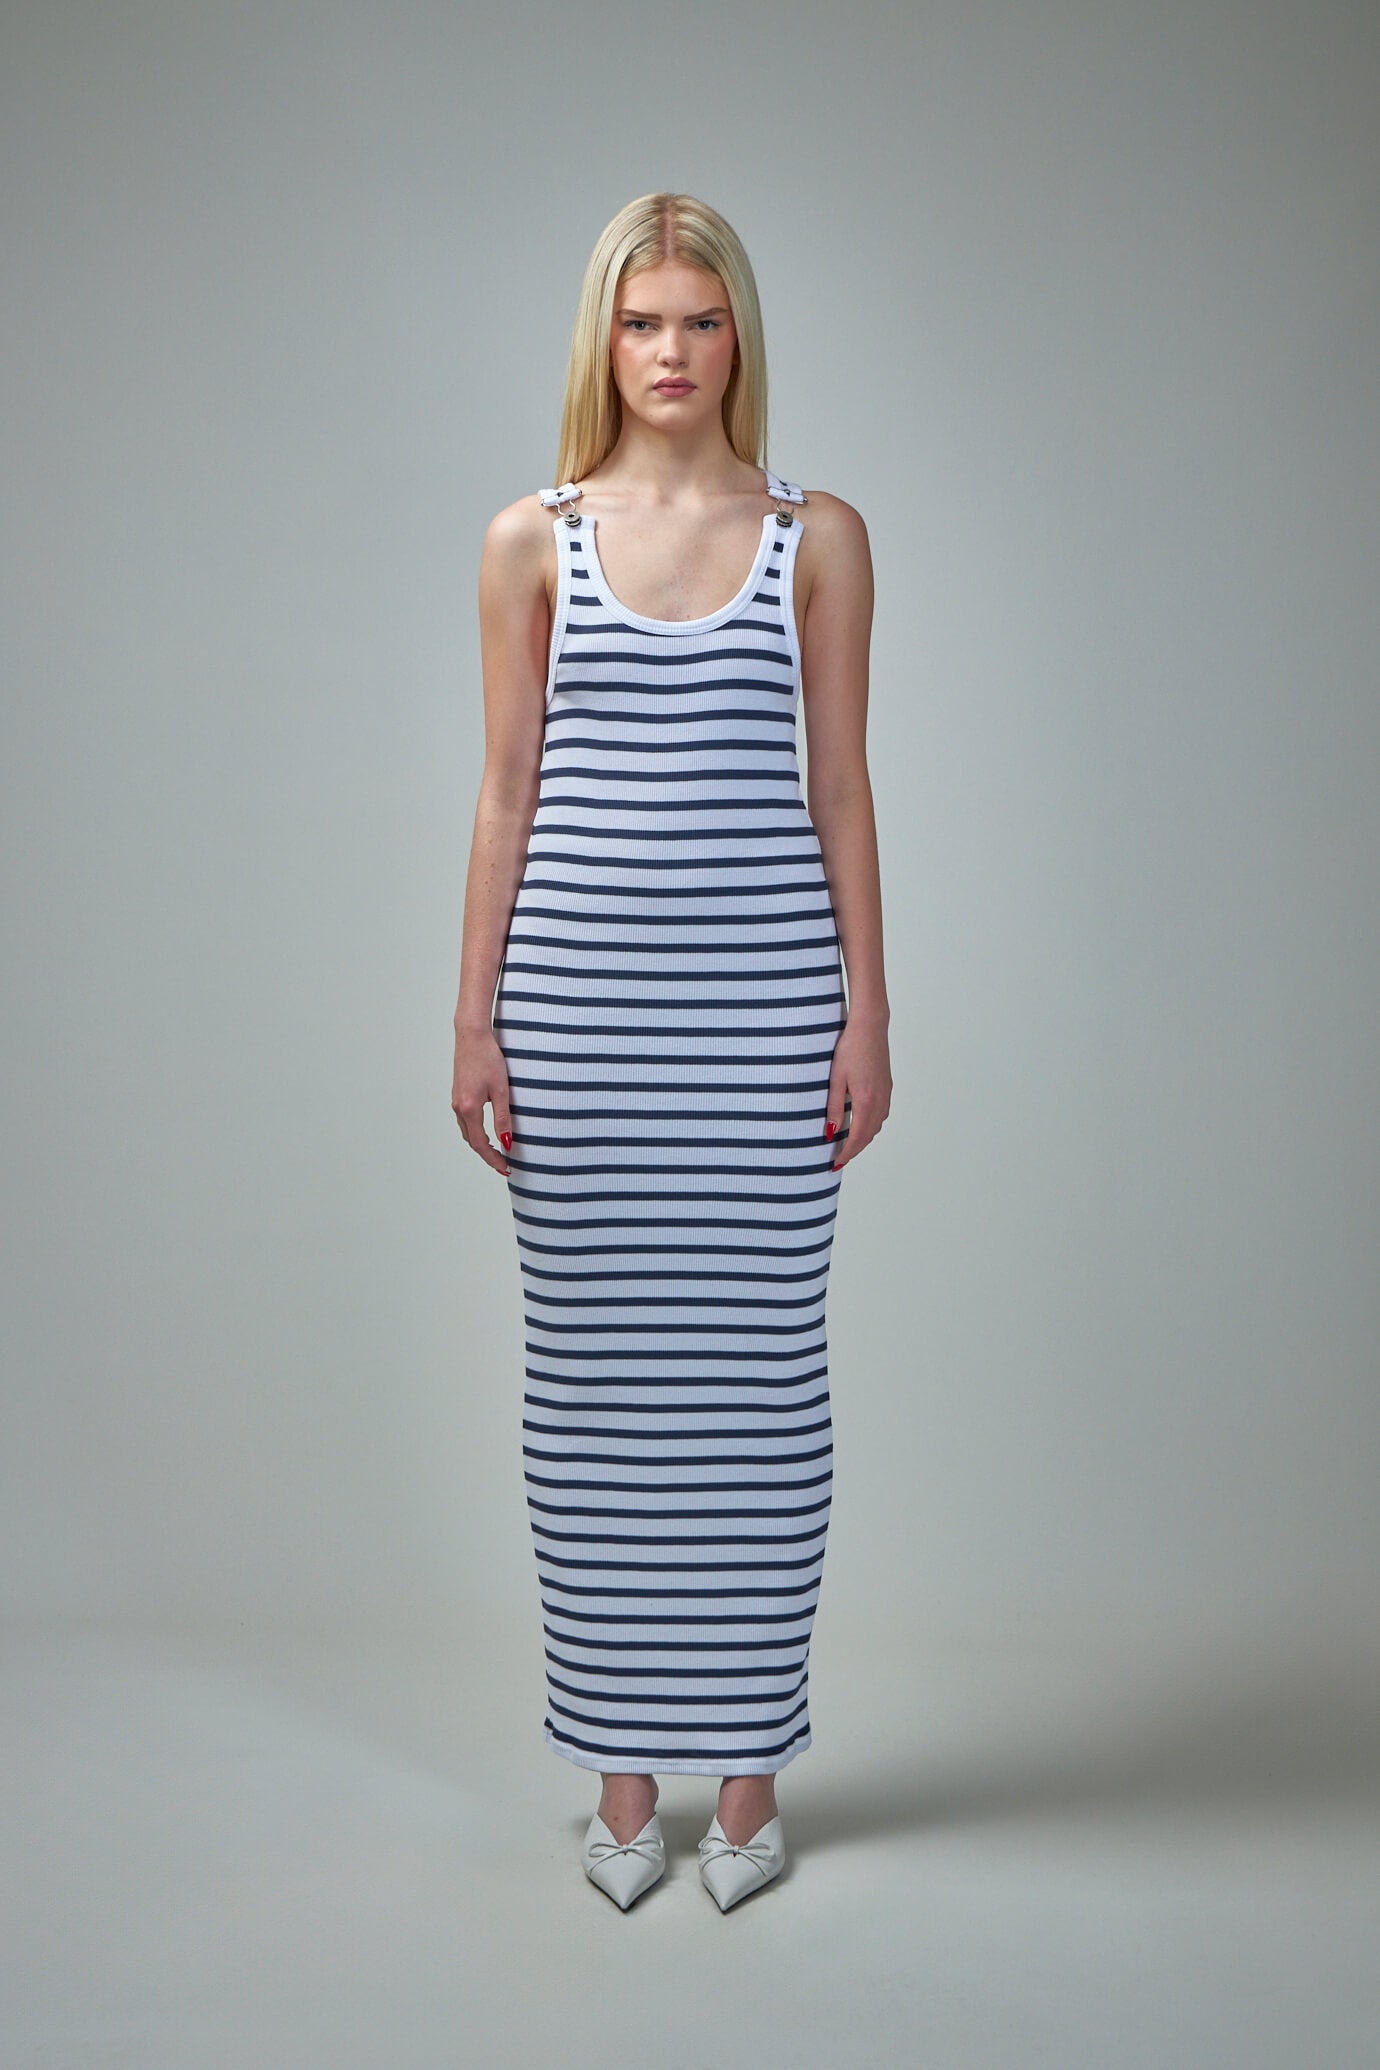 "The Strapped Marinière" Maxi Dress